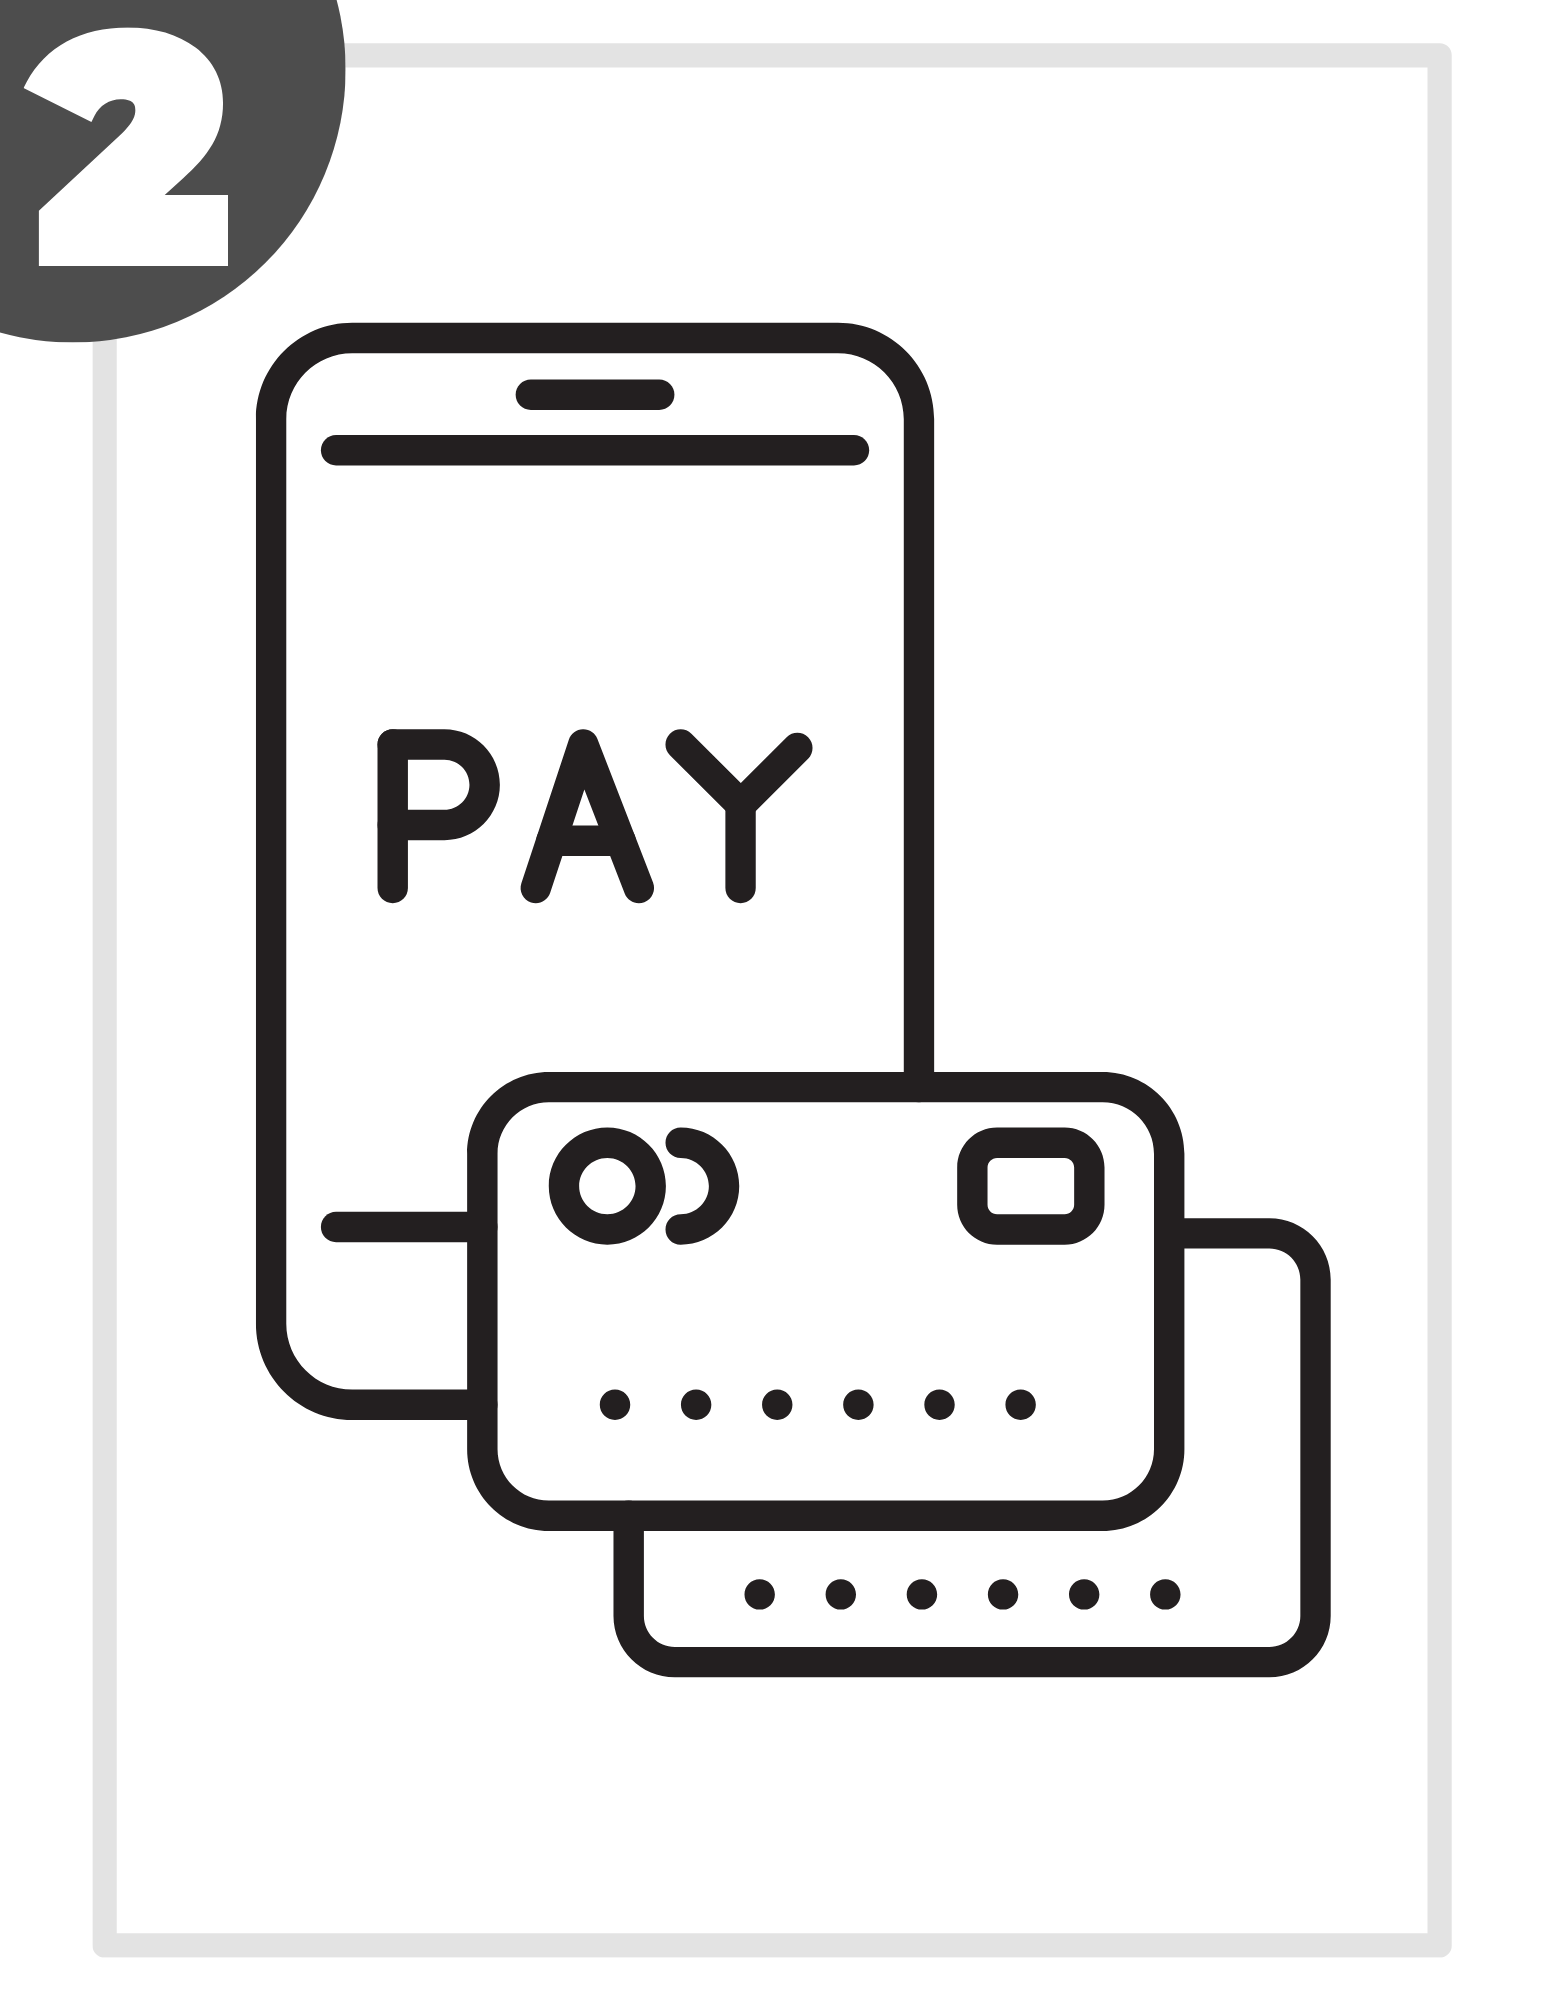 A black and white icon of a cell phone and a credit card.